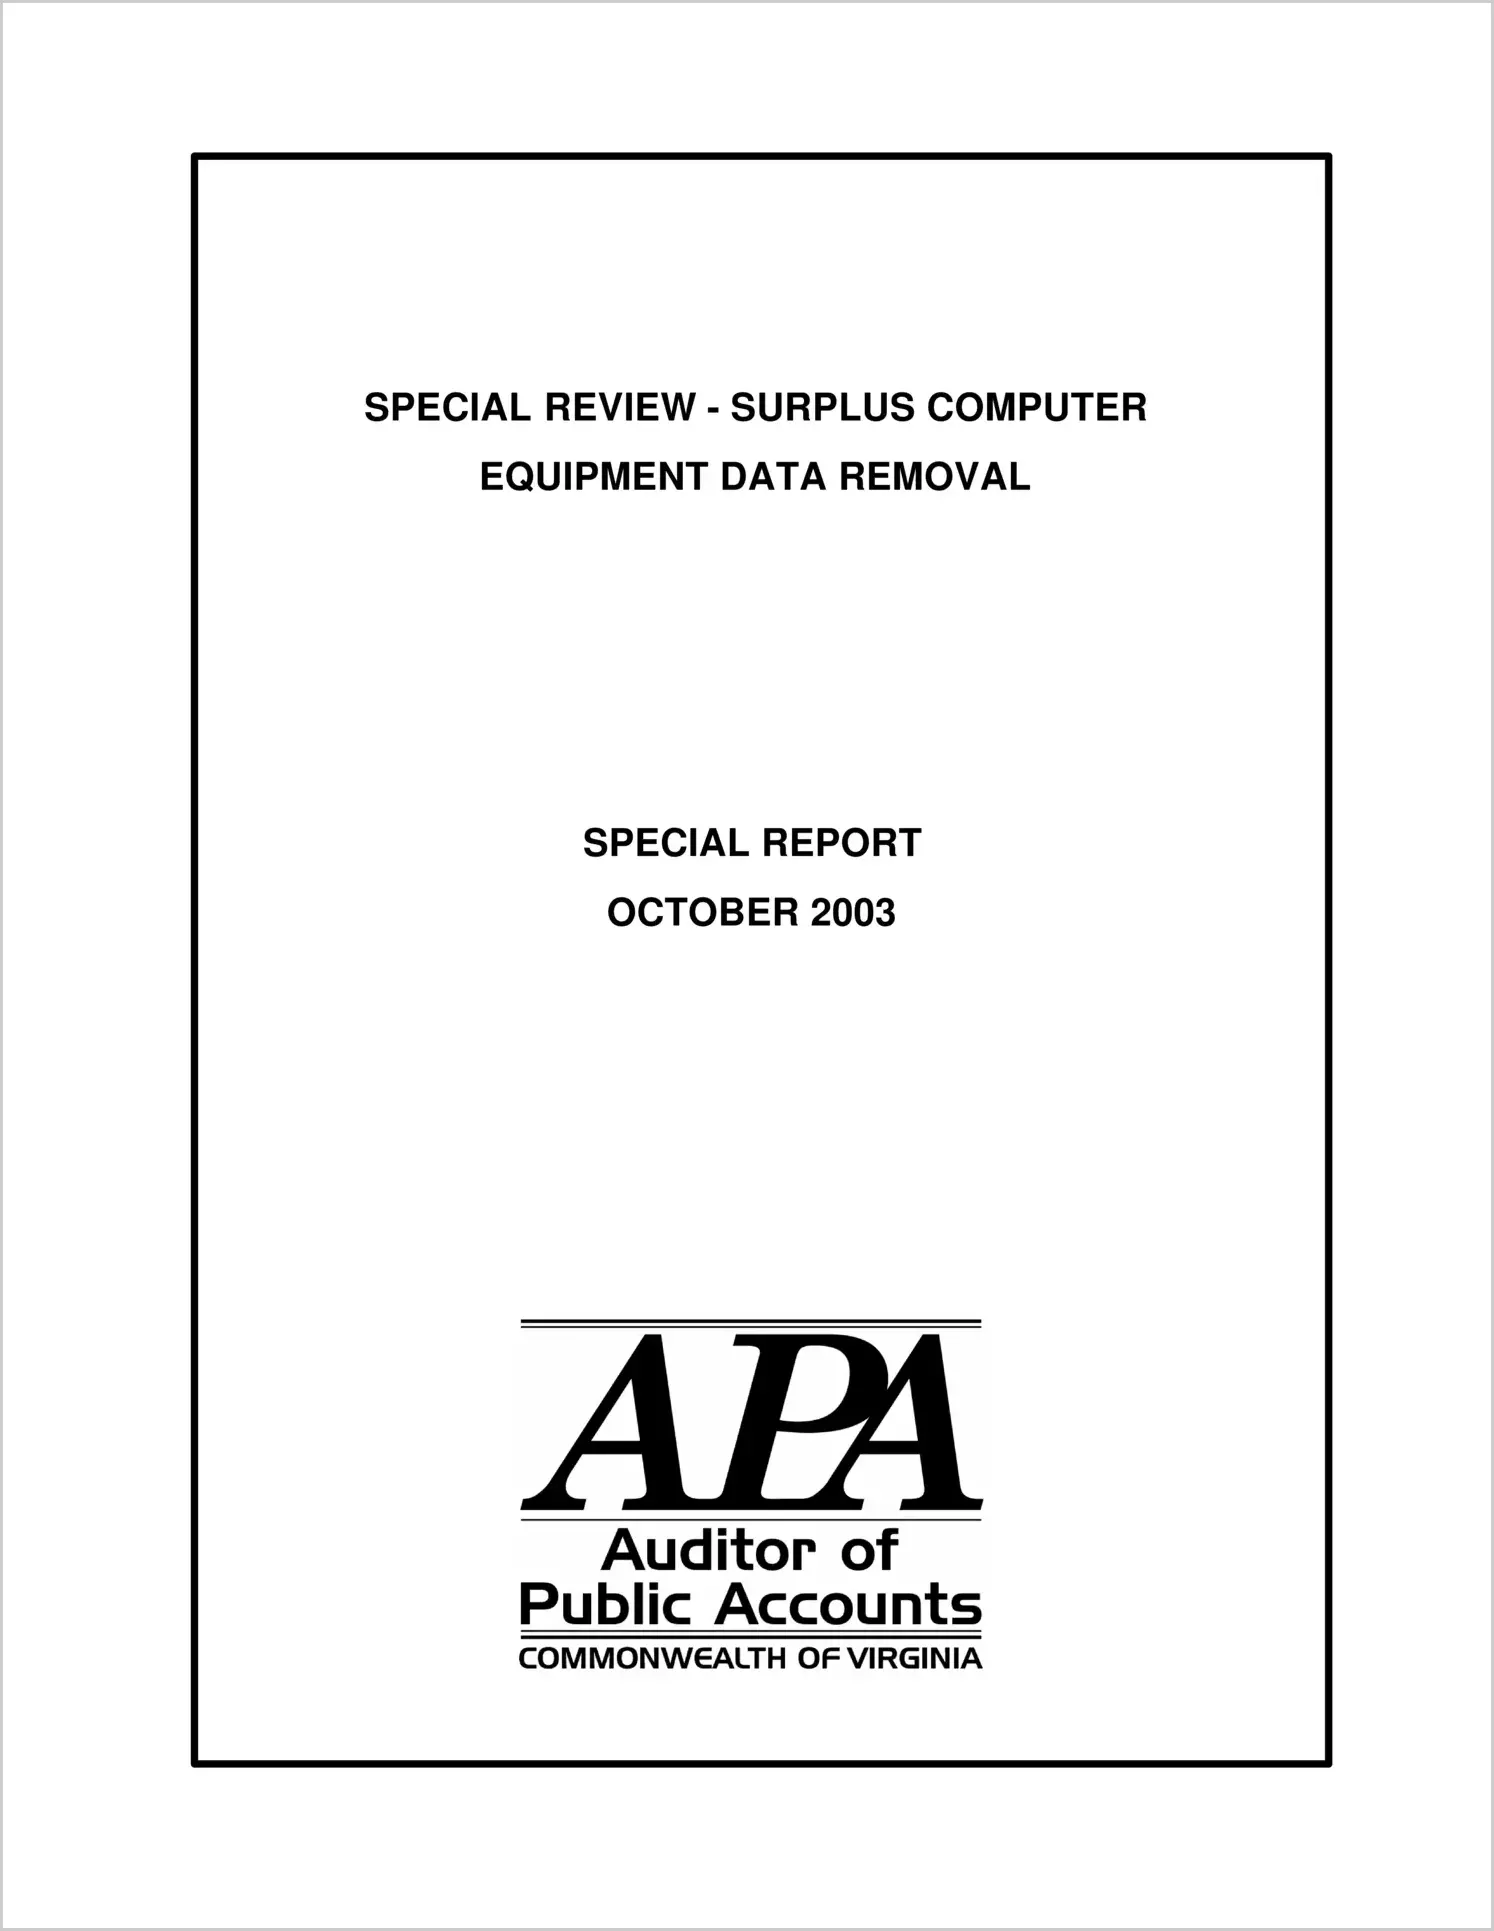 Special ReportSpecial Review - Surplus Computer Equipment Data Removal (Report Date: October 2003)